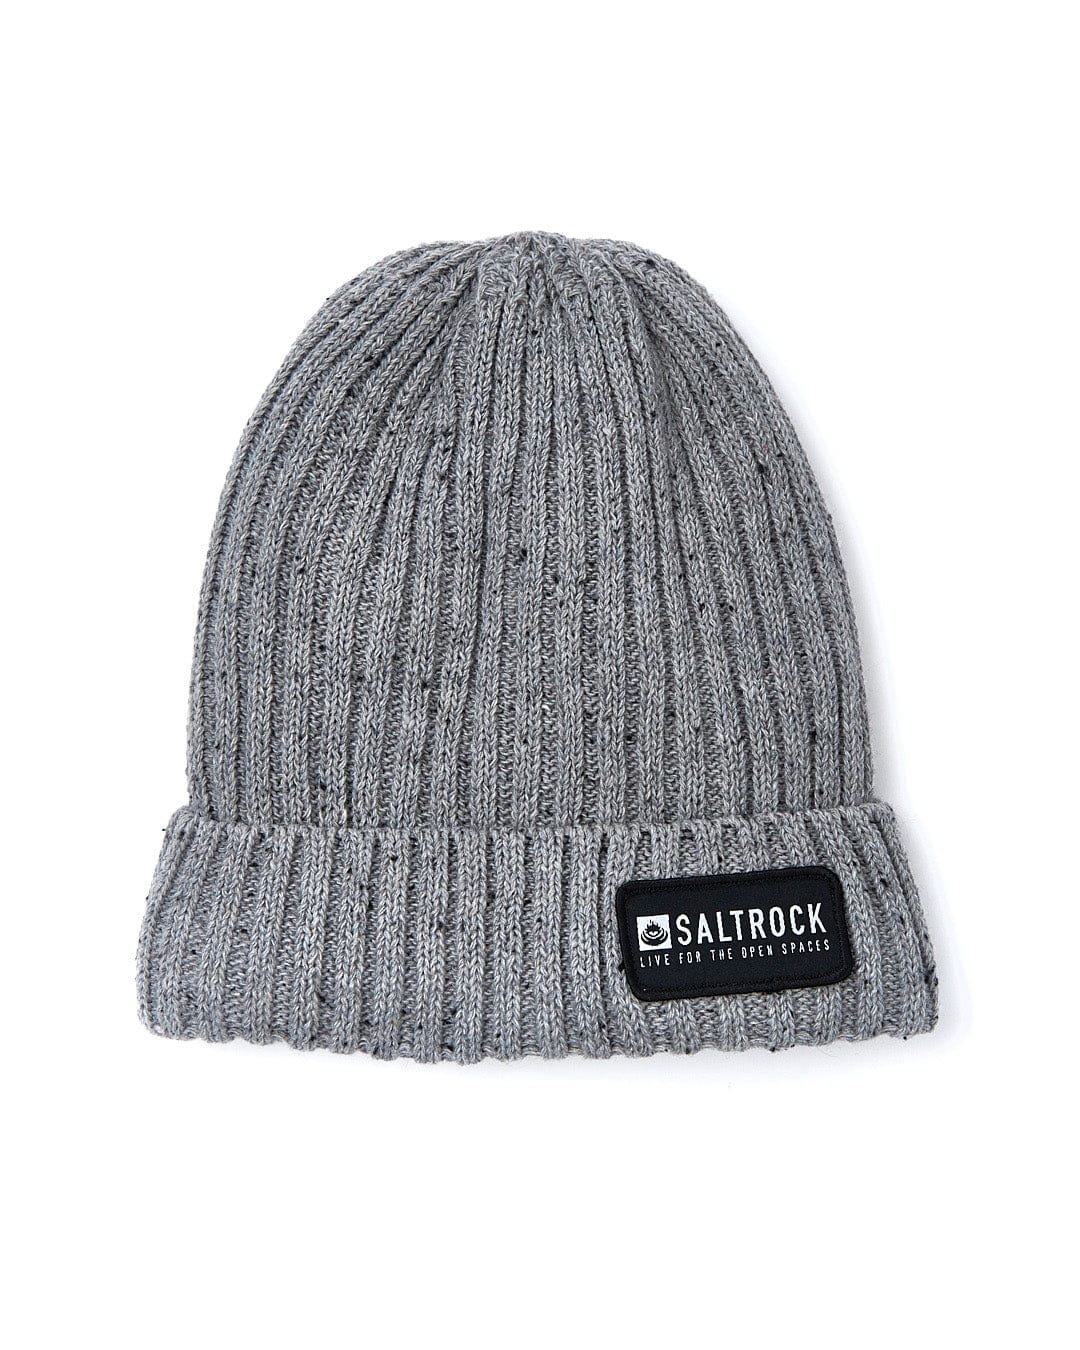 A Saltrock Heritage - Beanie - Grey with a logo on it.